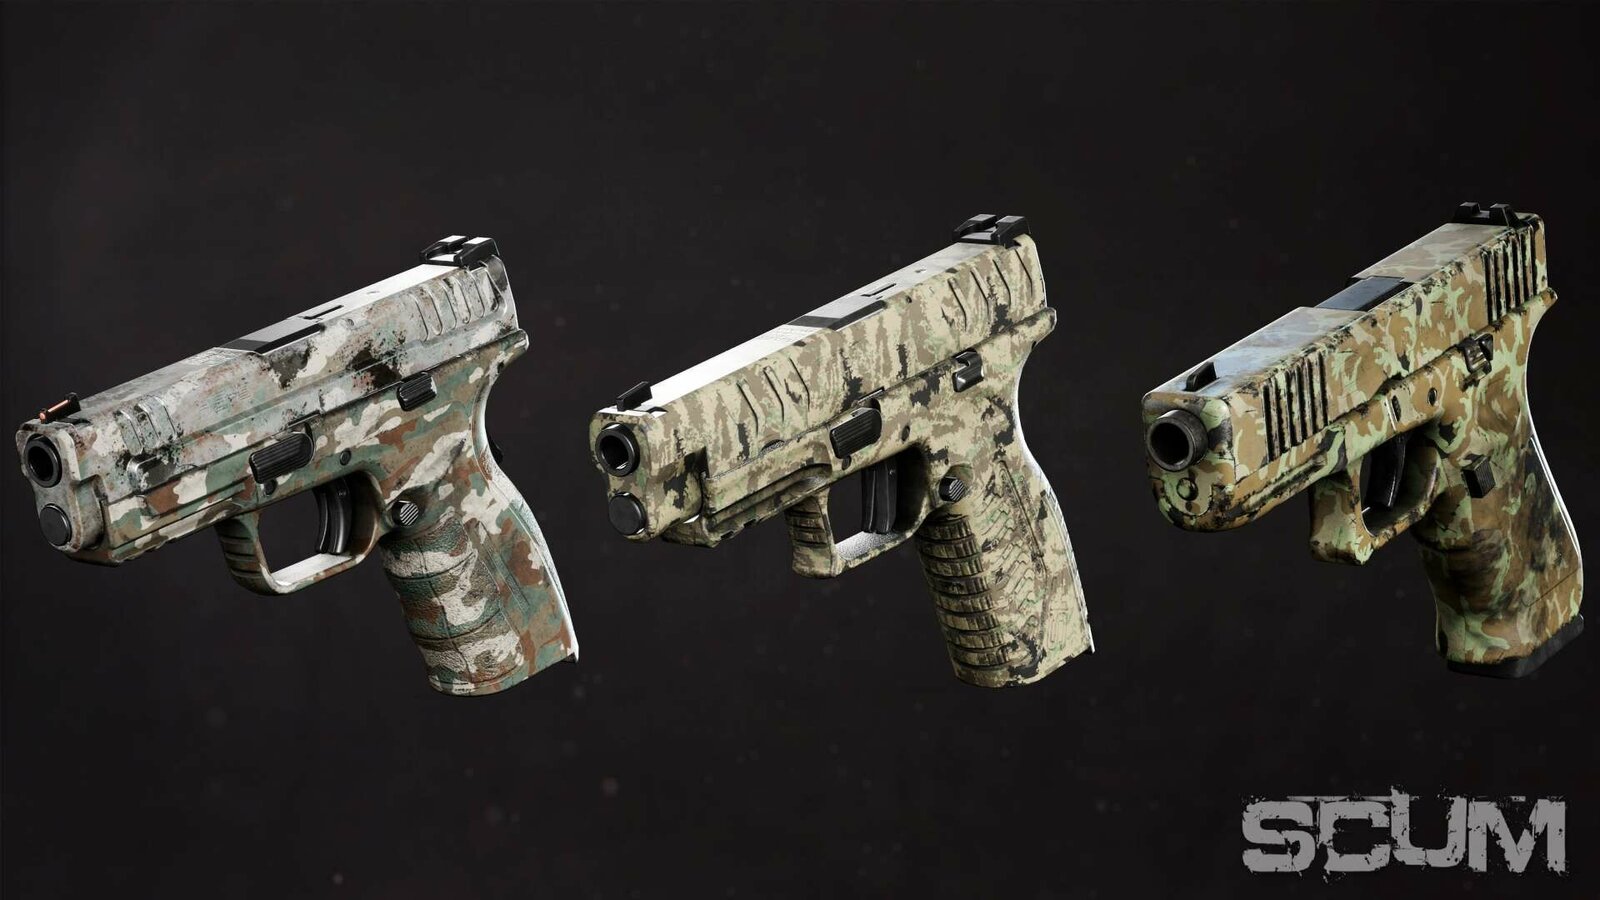 SCUM: Weapon Skins pack